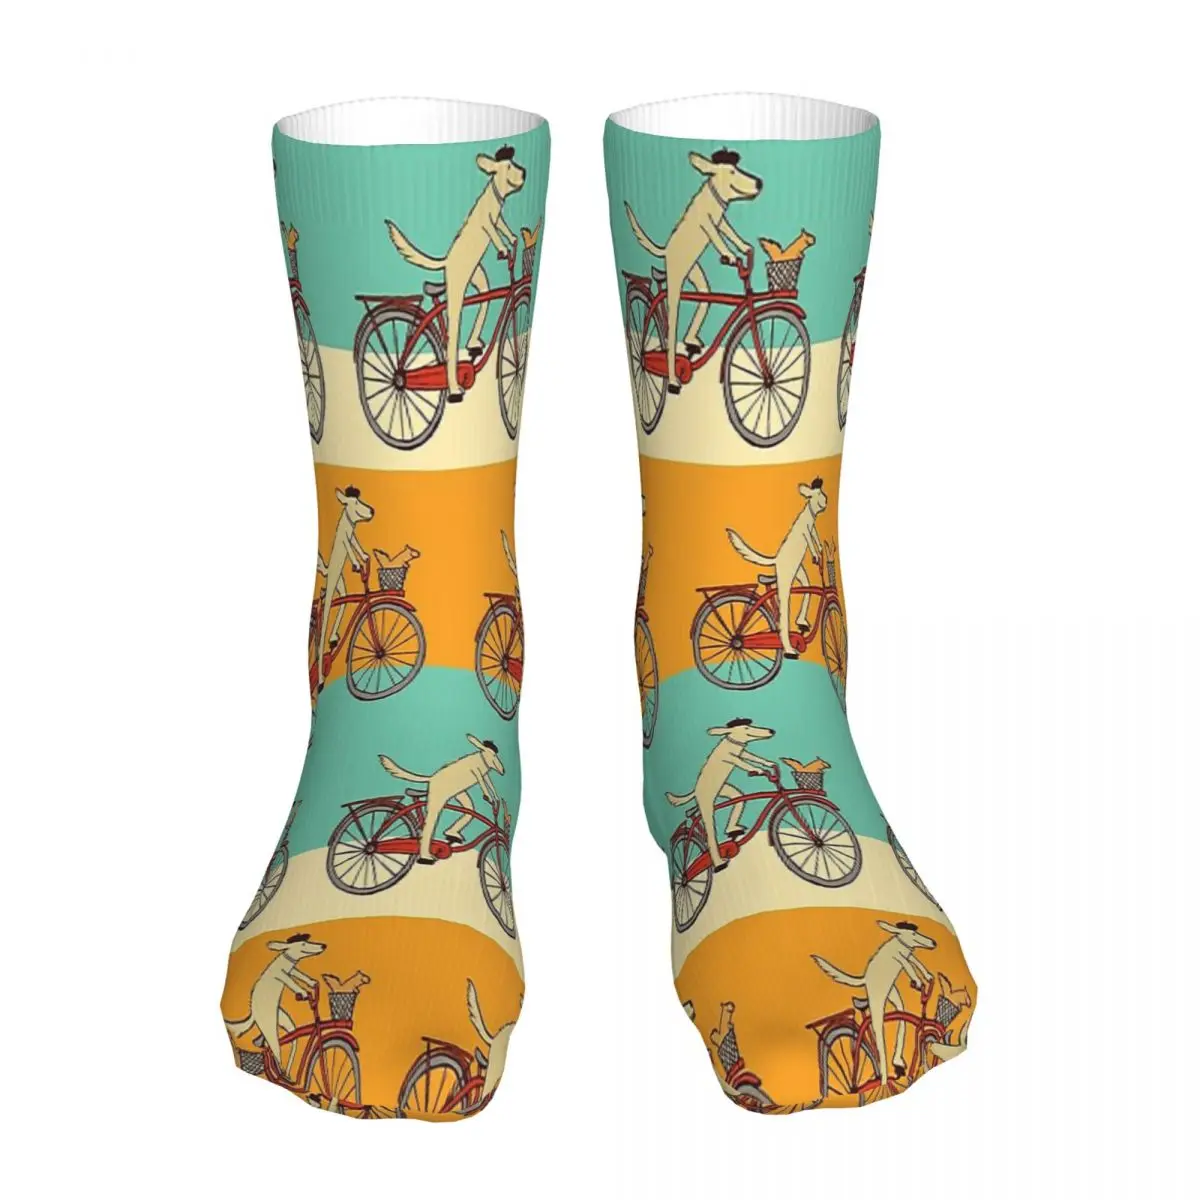 

Dog And Squirrel Are Friends Whimsical Animal Art Dog Riding A Bicycle Bike Ride Bicycle Sock Socks Women Polyester Stockings